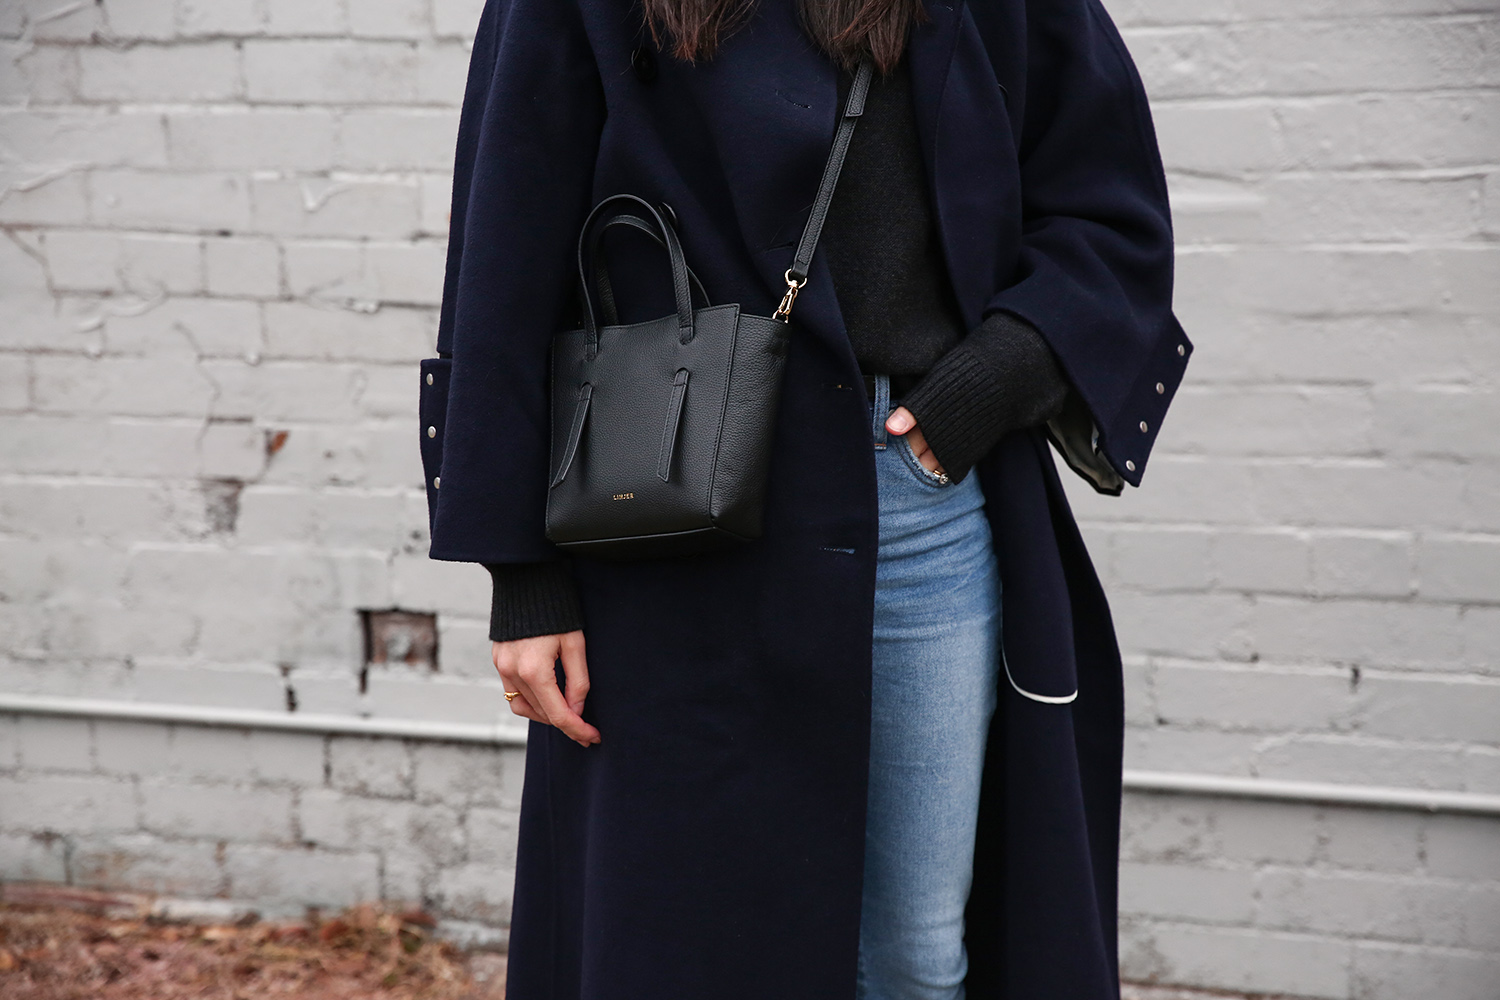 Jamie Lee of Mademoiselle wearing a Scandi inspired minimal outfit